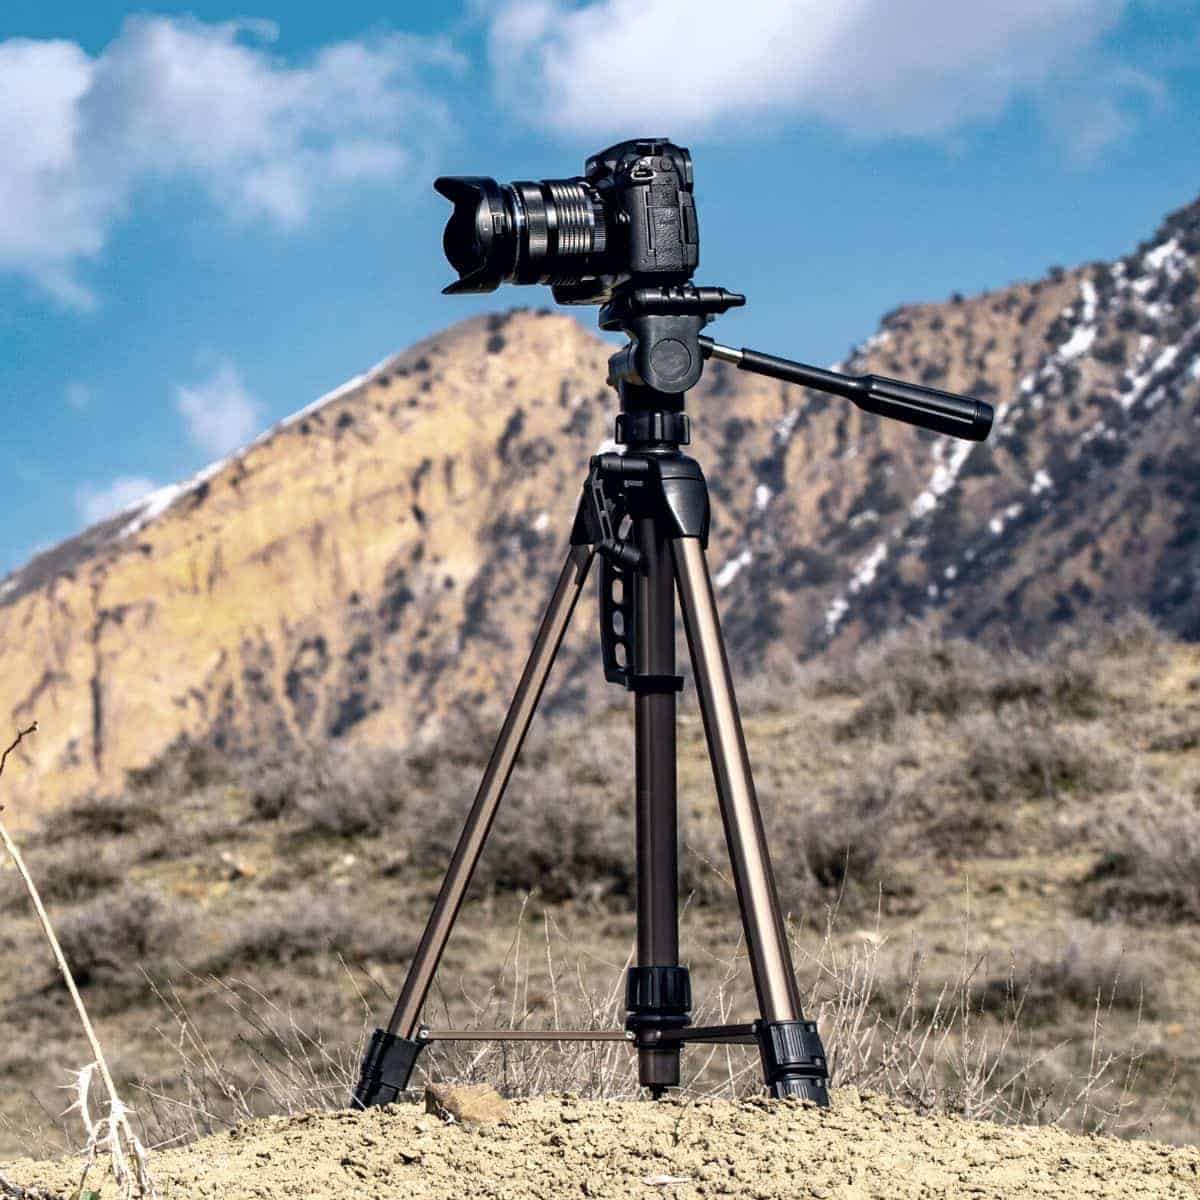 Camera on a tripod in the mountains.